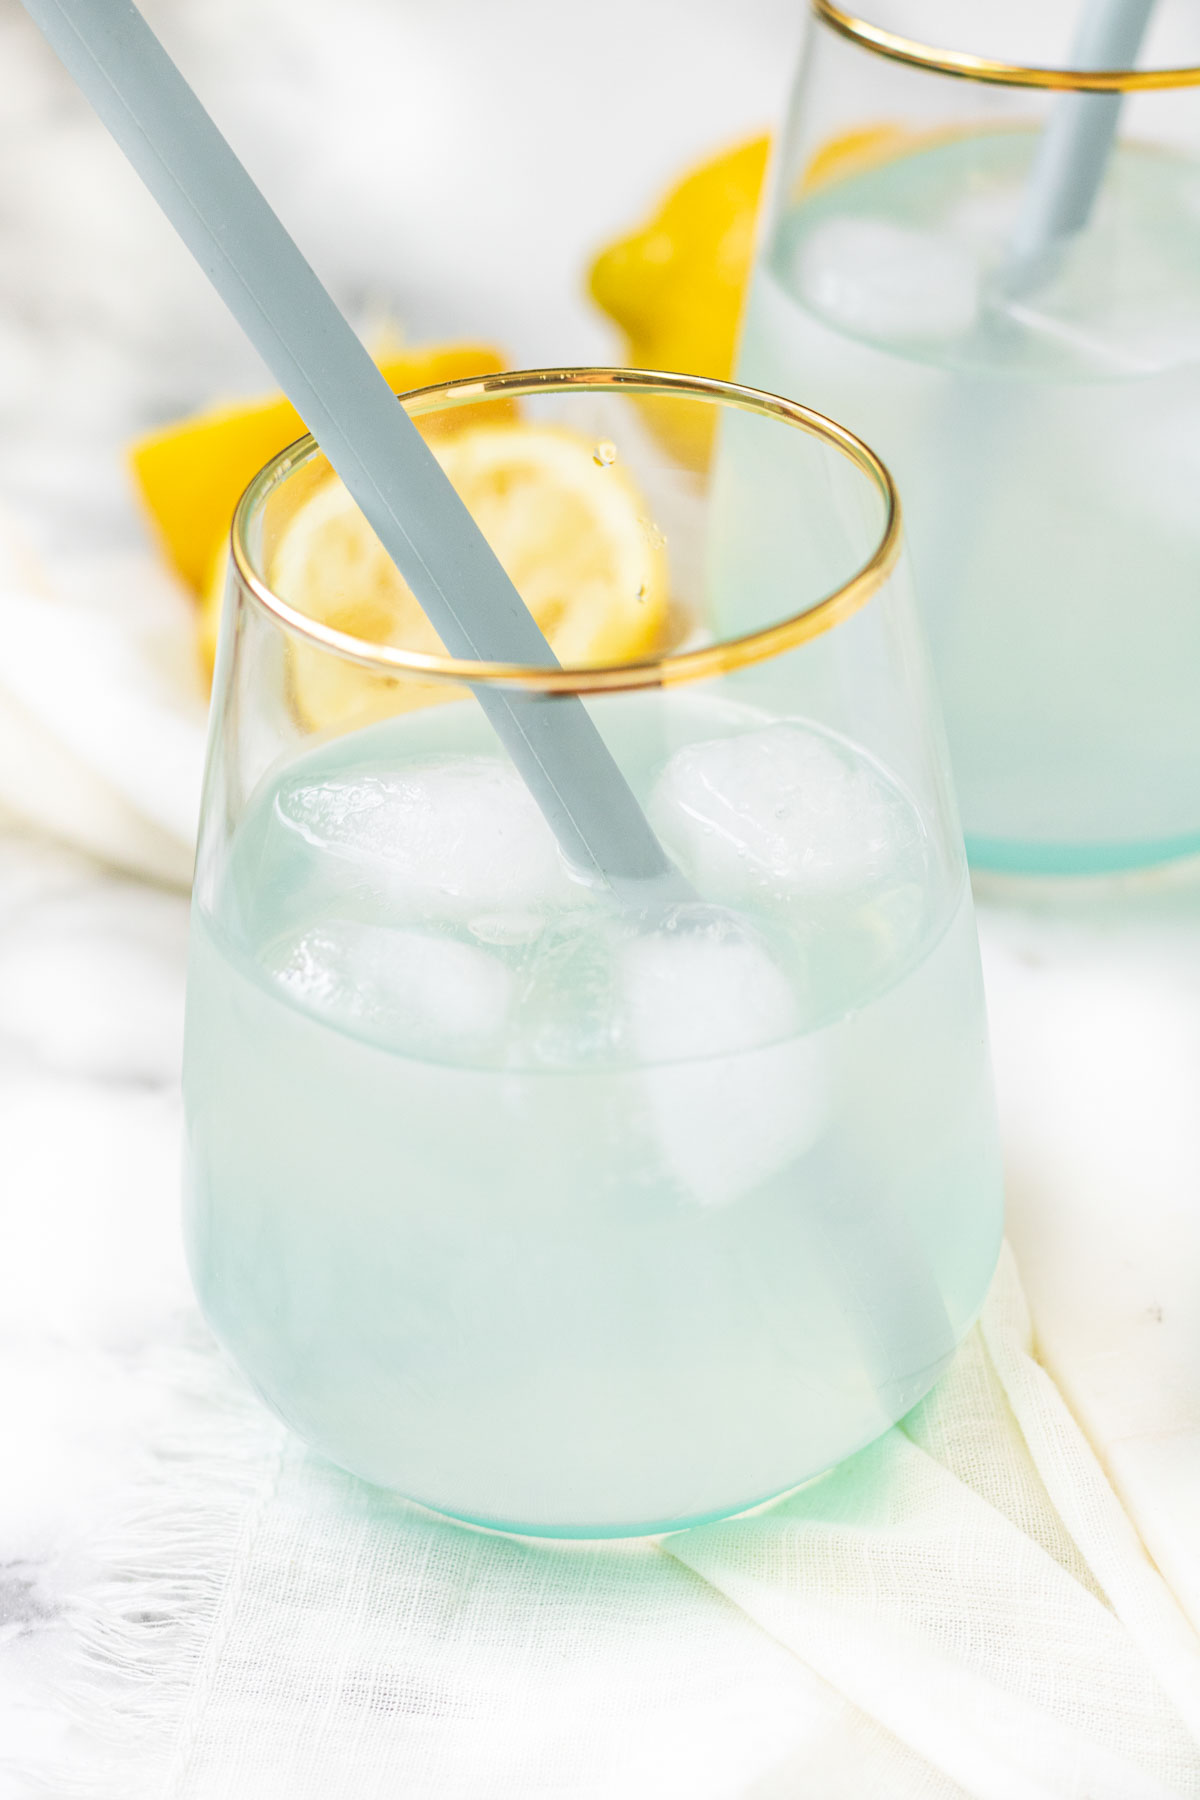 Lemonade in a glass with a straw.